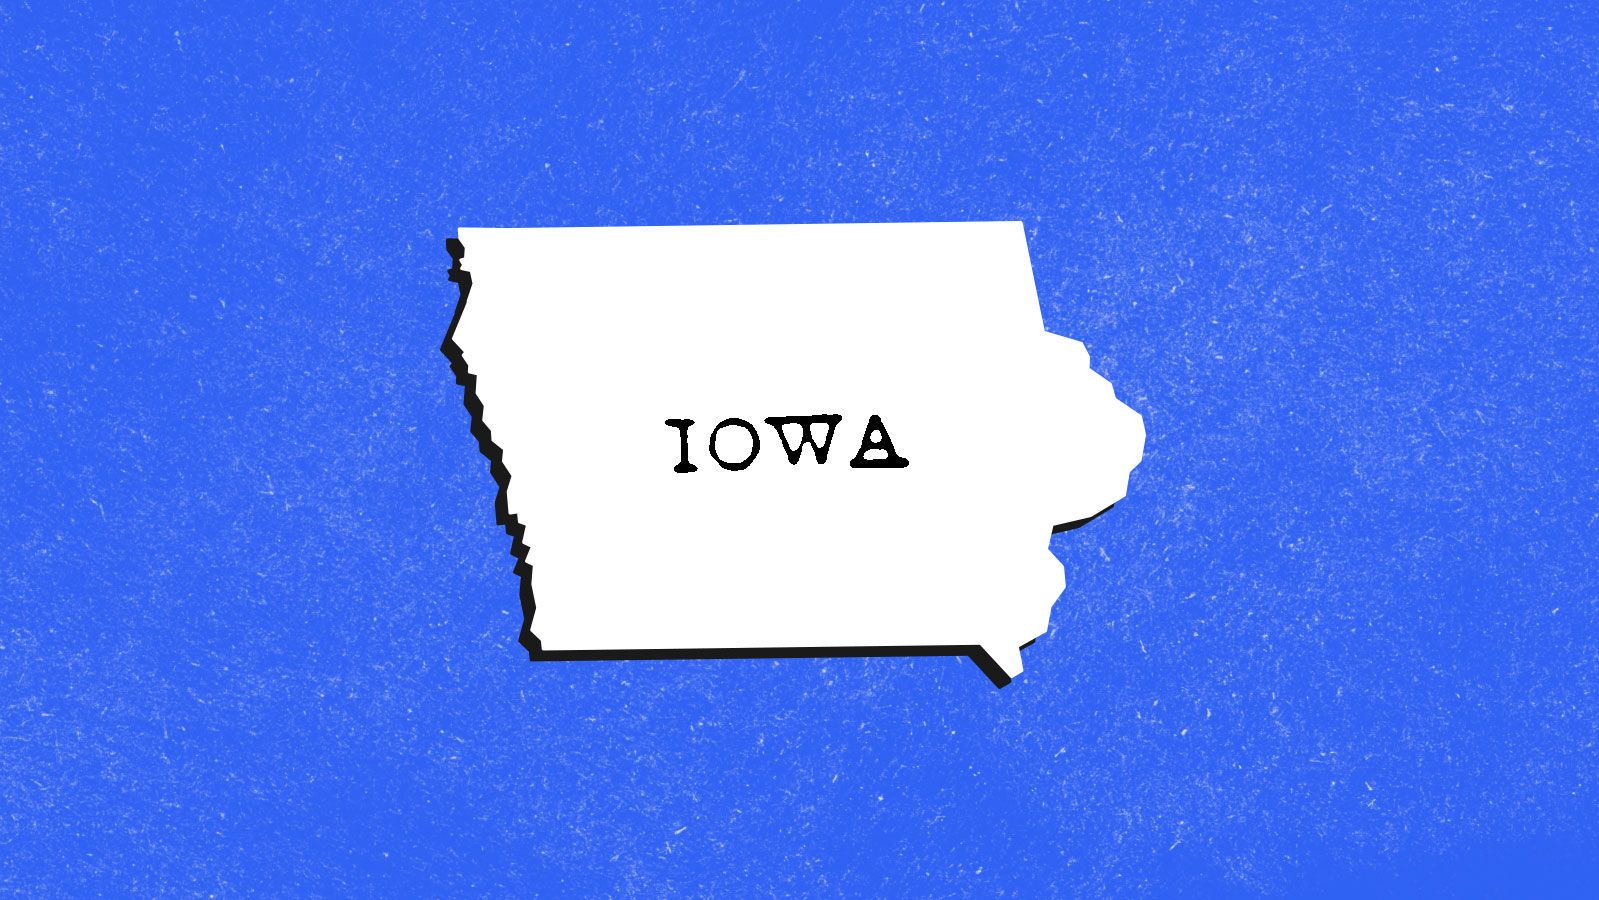 RESTRICTED 20190609 Iowa illustration the point